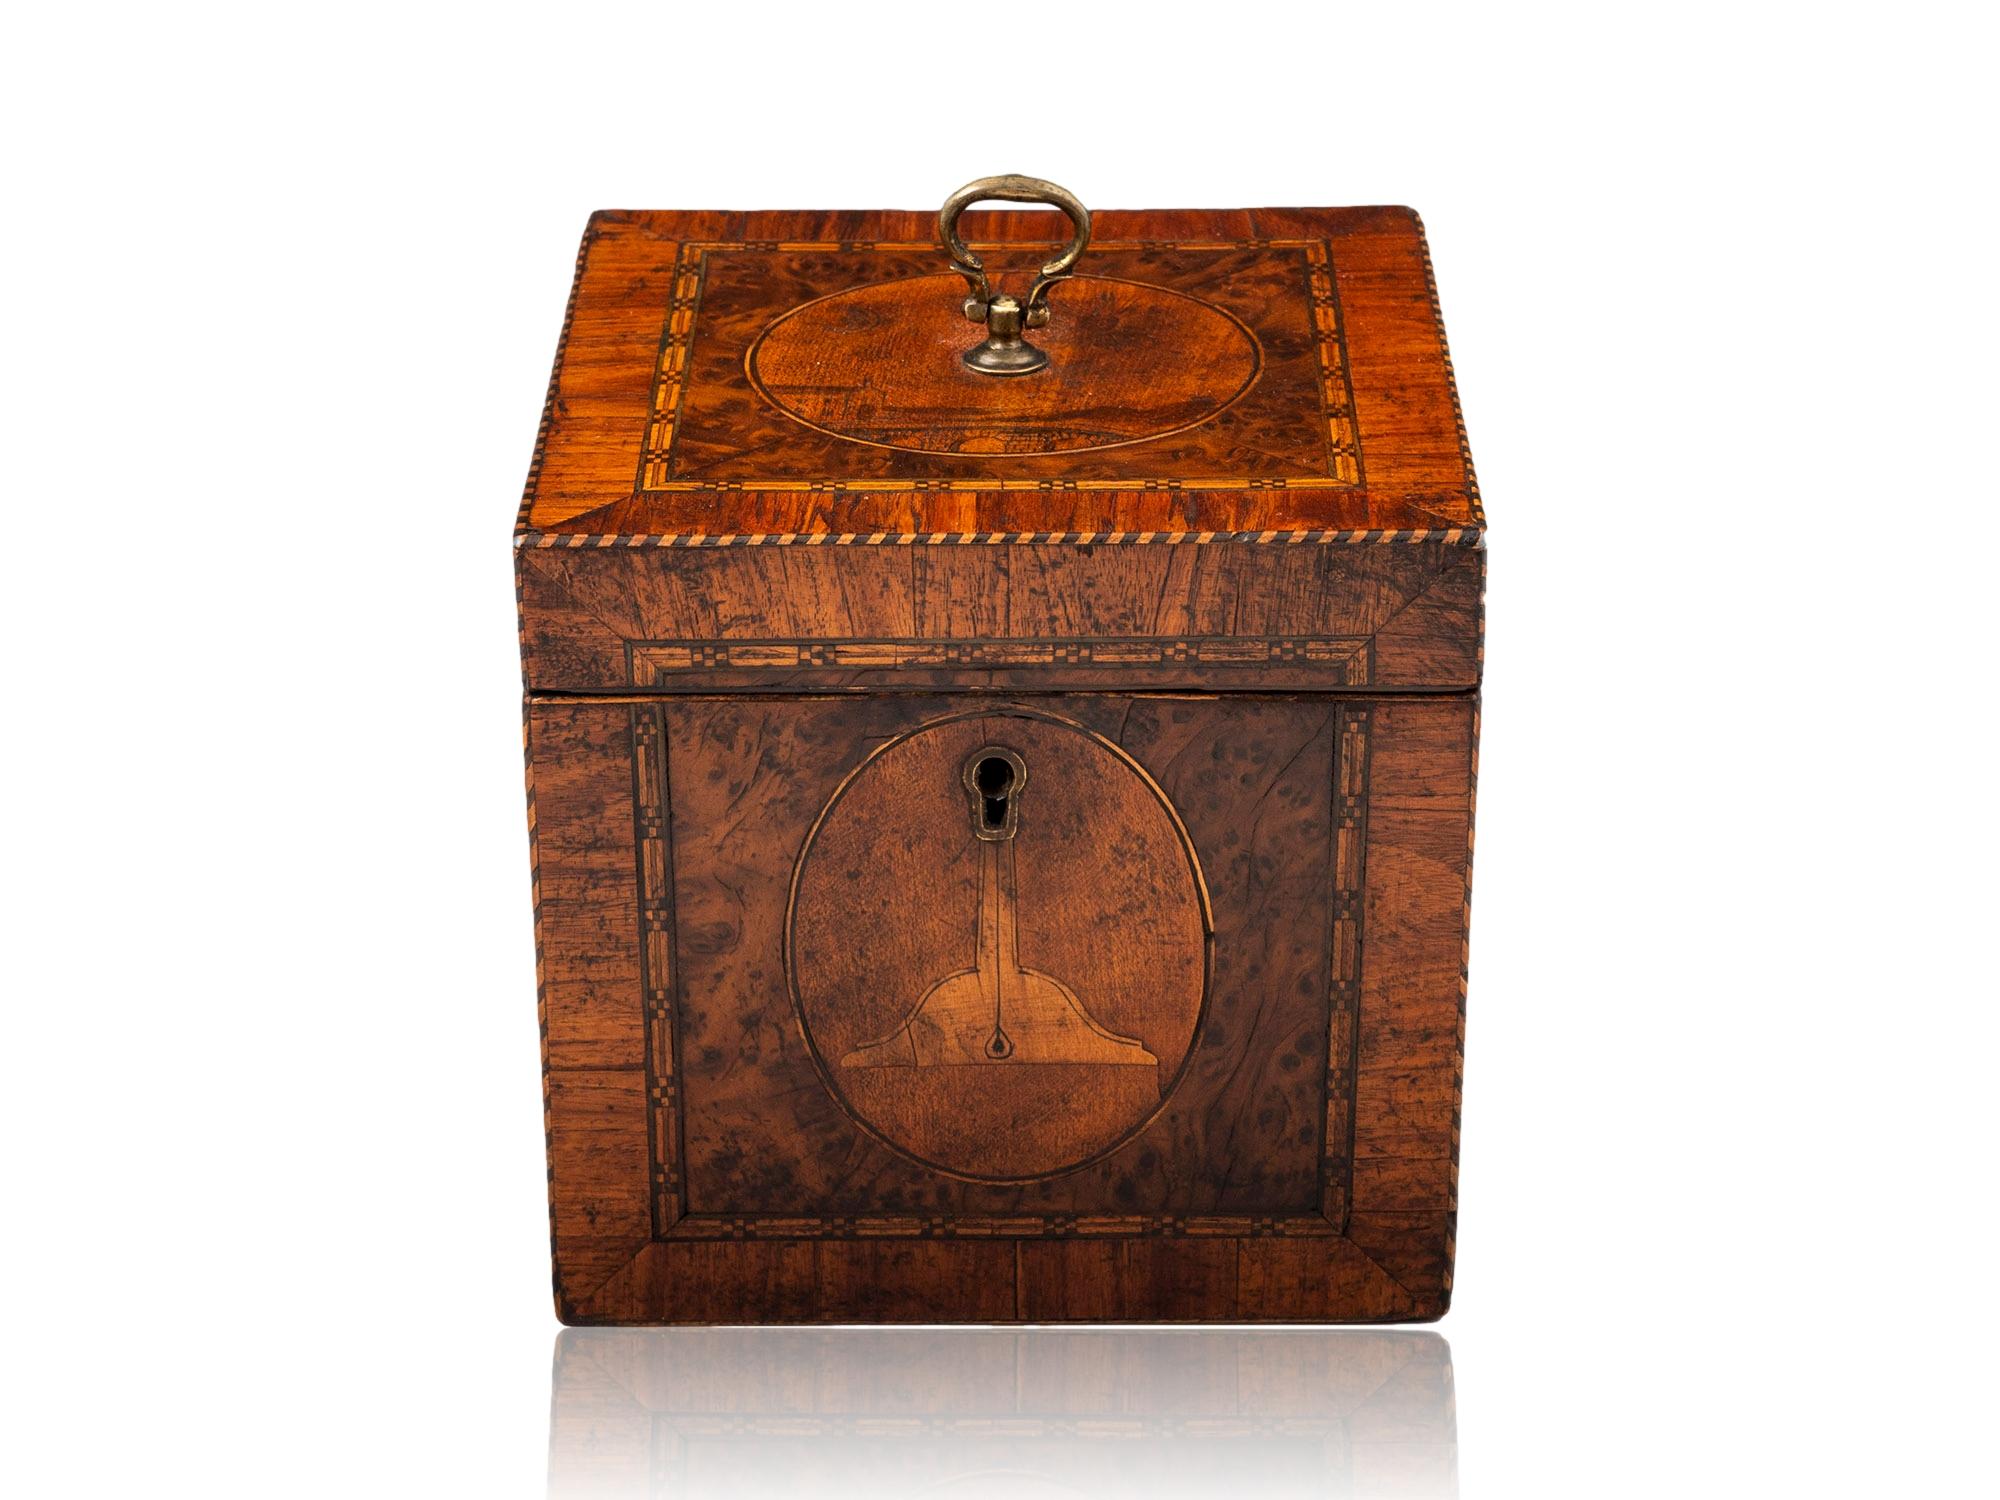 Featuring Masonic Scenes

From our Tea Caddy collection, we are delighted to offer this extremely rare Georgian Masonic Tea caddy. The Tea Caddy of box form with chequered edging and borders of Tulipwood surrounding Burr Yew wood squares each